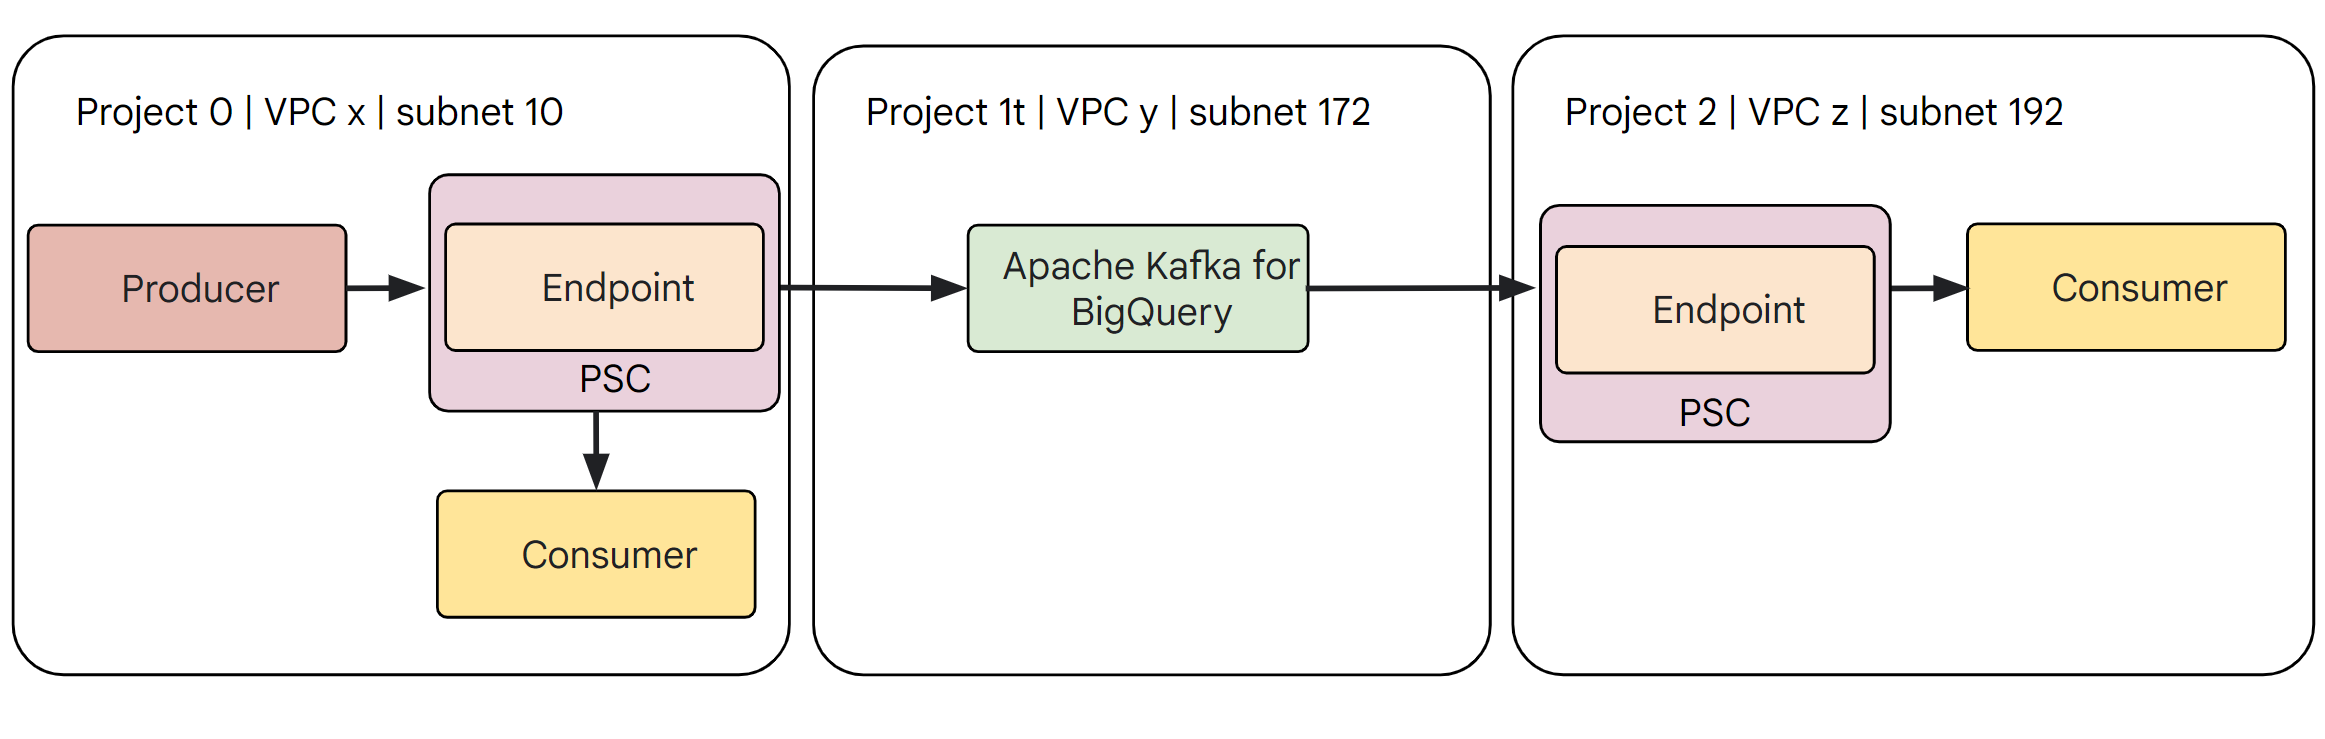 Tenant project for
Apache Kafka for BigQuery